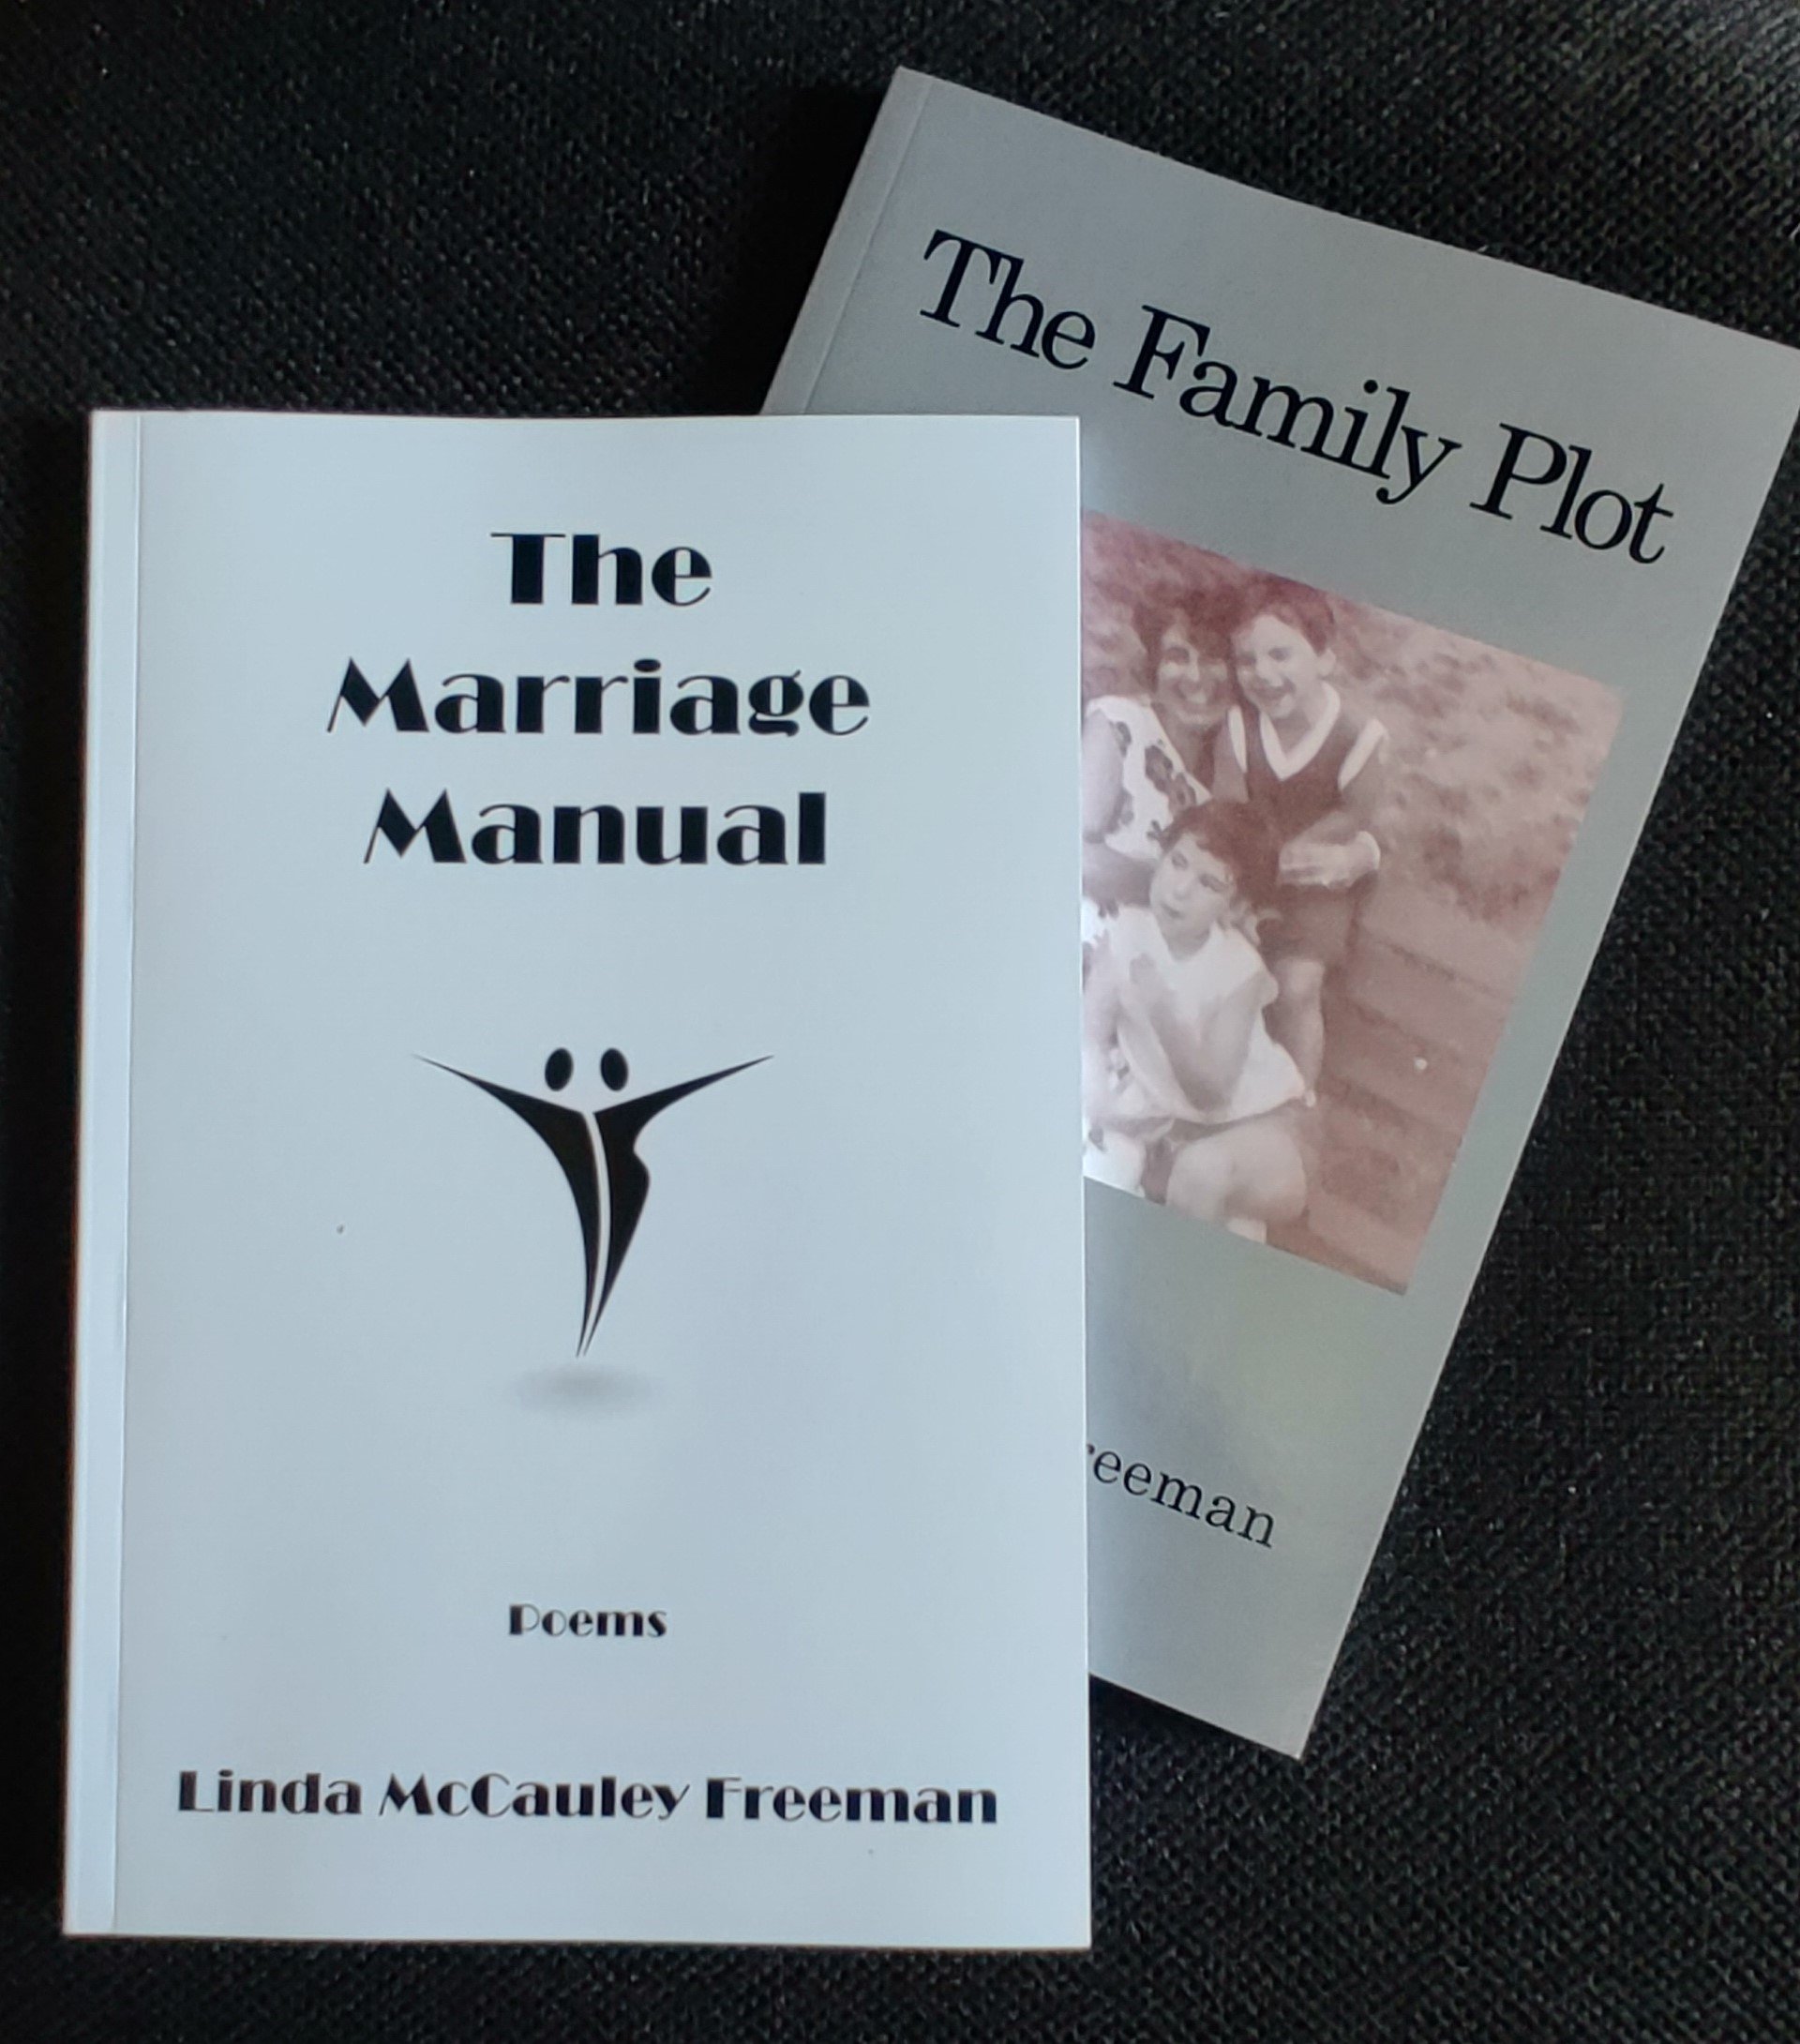 Marriage Manual & Family Plot Cover Image.jpg